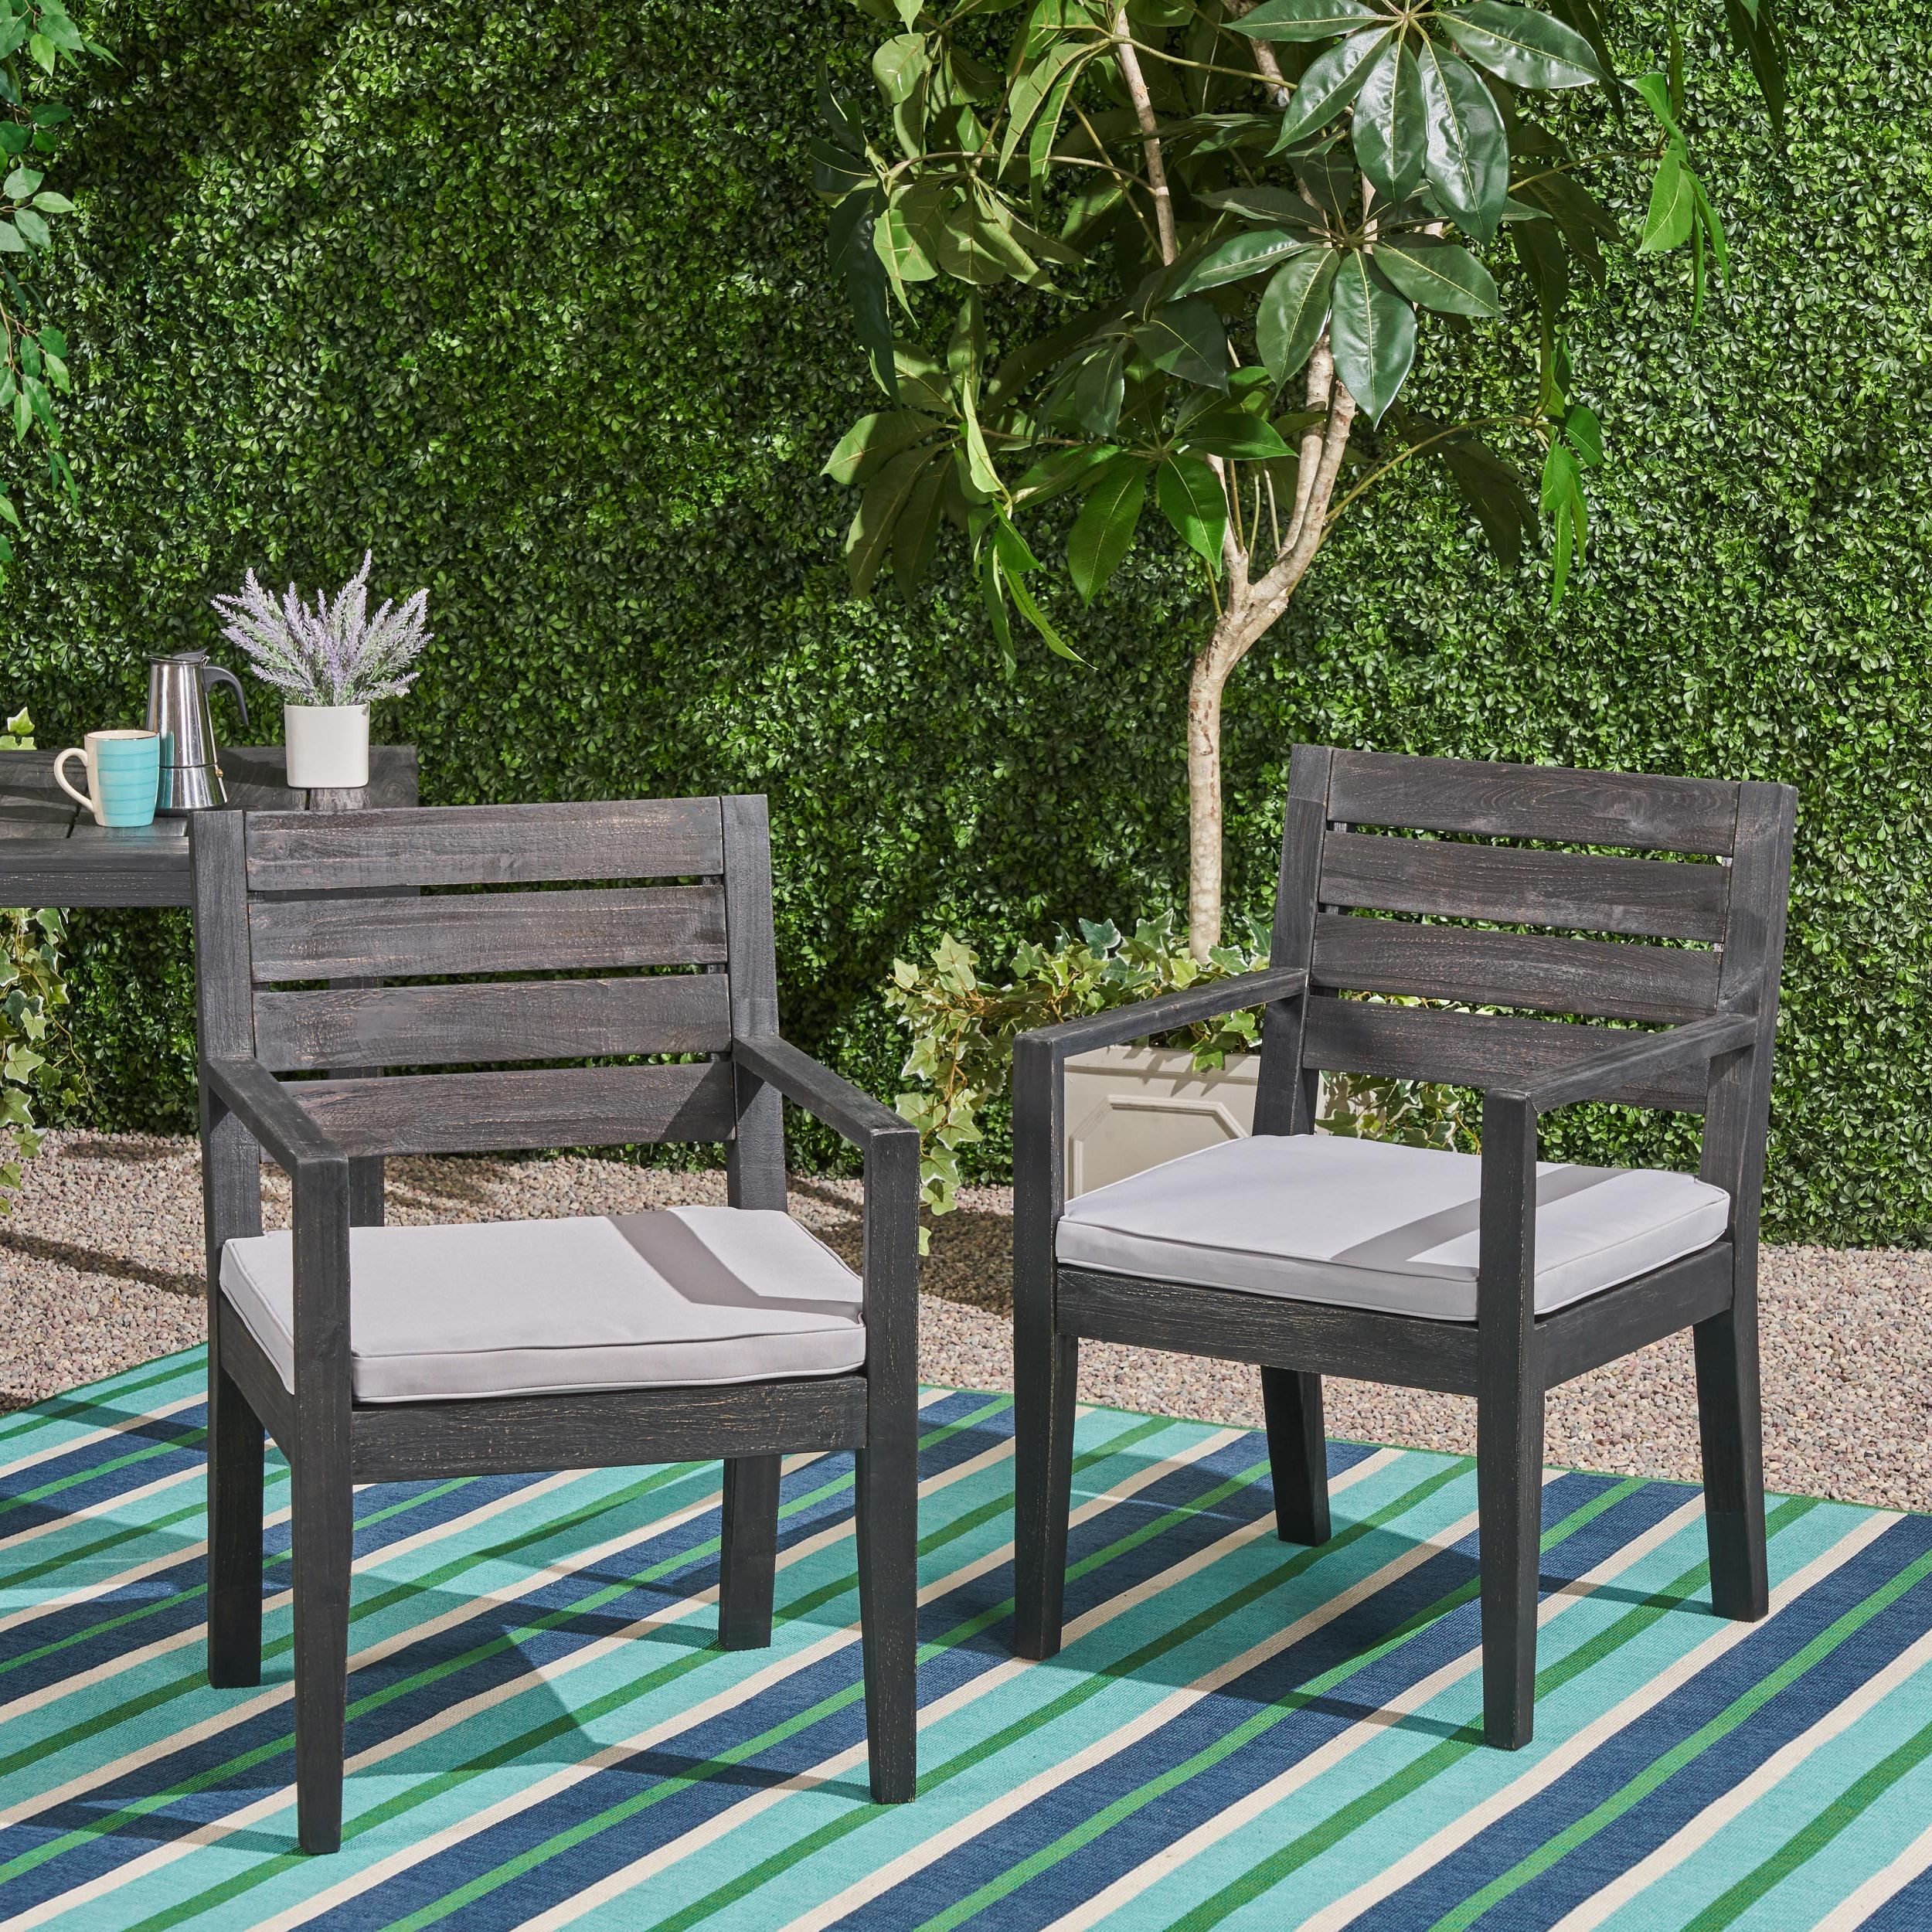 Most Popular Wood Outdoor Armchair Sets Intended For Zoe Outdoor Acacia Wood Dining Chairs With Cushions,, Set Of  (View 8 of 15)